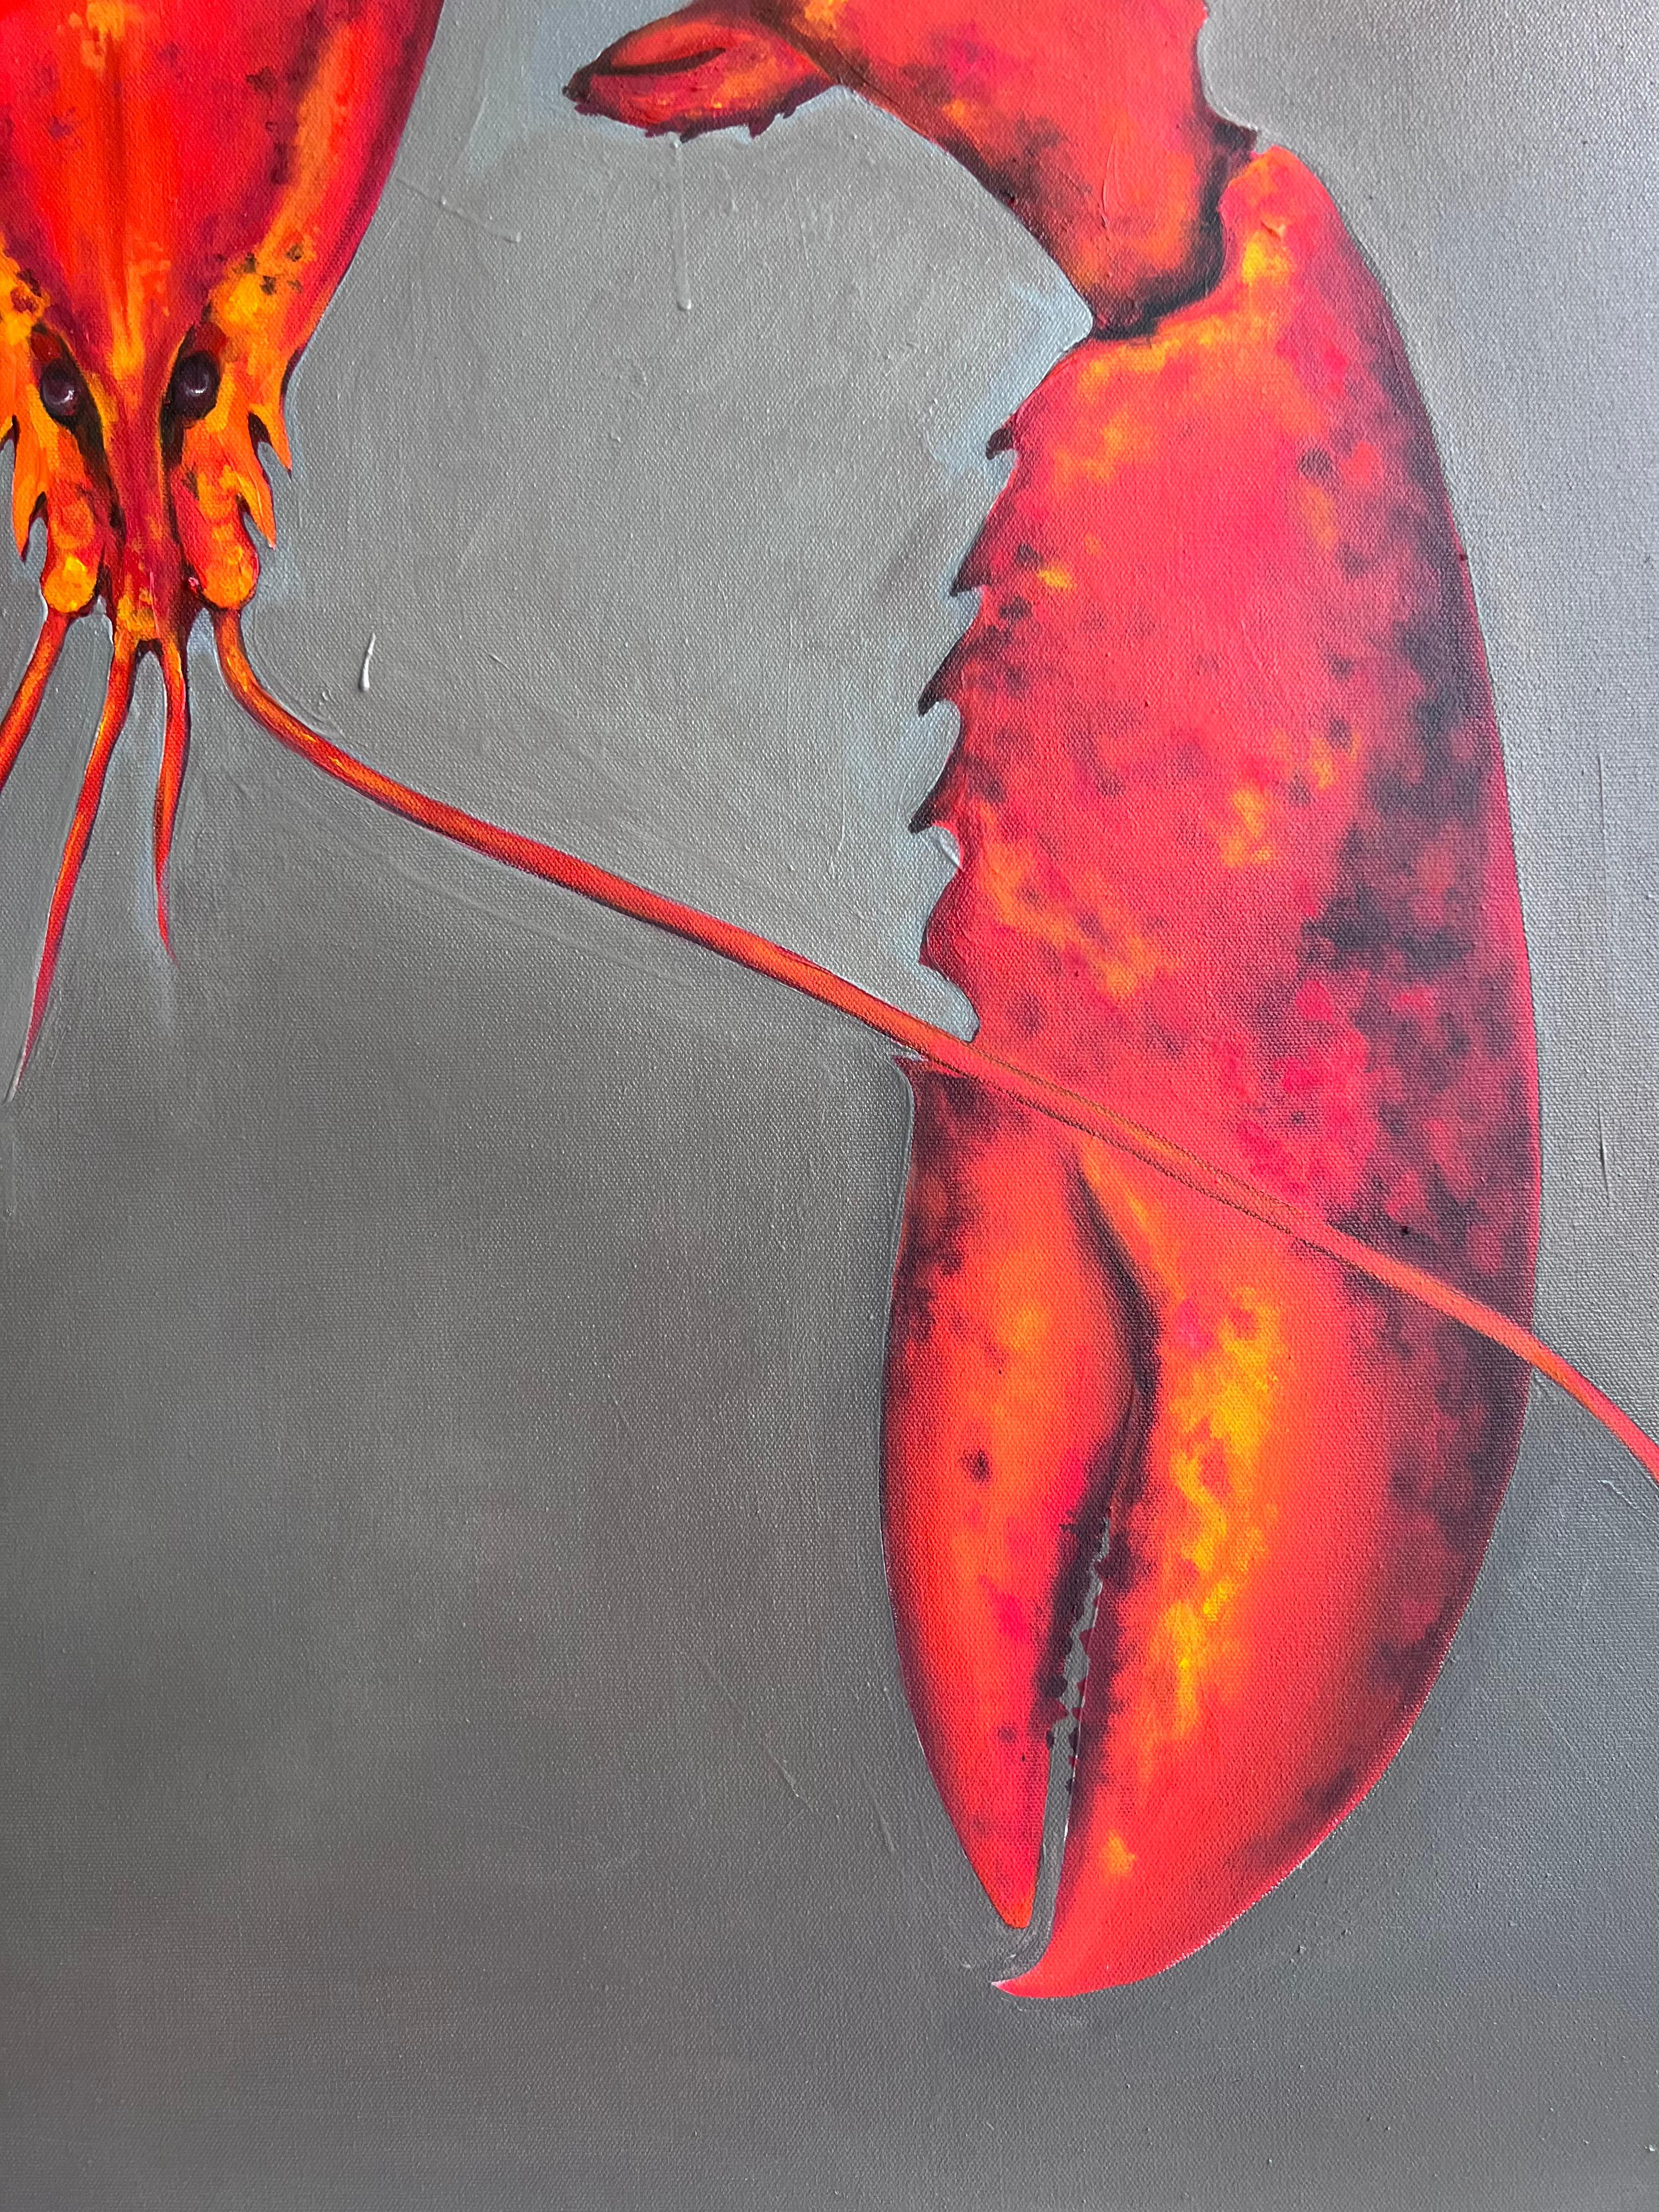 Combining agony and passion in a lobster painting could result in a striking and symbolic artwork. The lobster, with its vibrant red color and sharp claws, could represent the intensity of passion, while simultaneously embodying the idea of agony